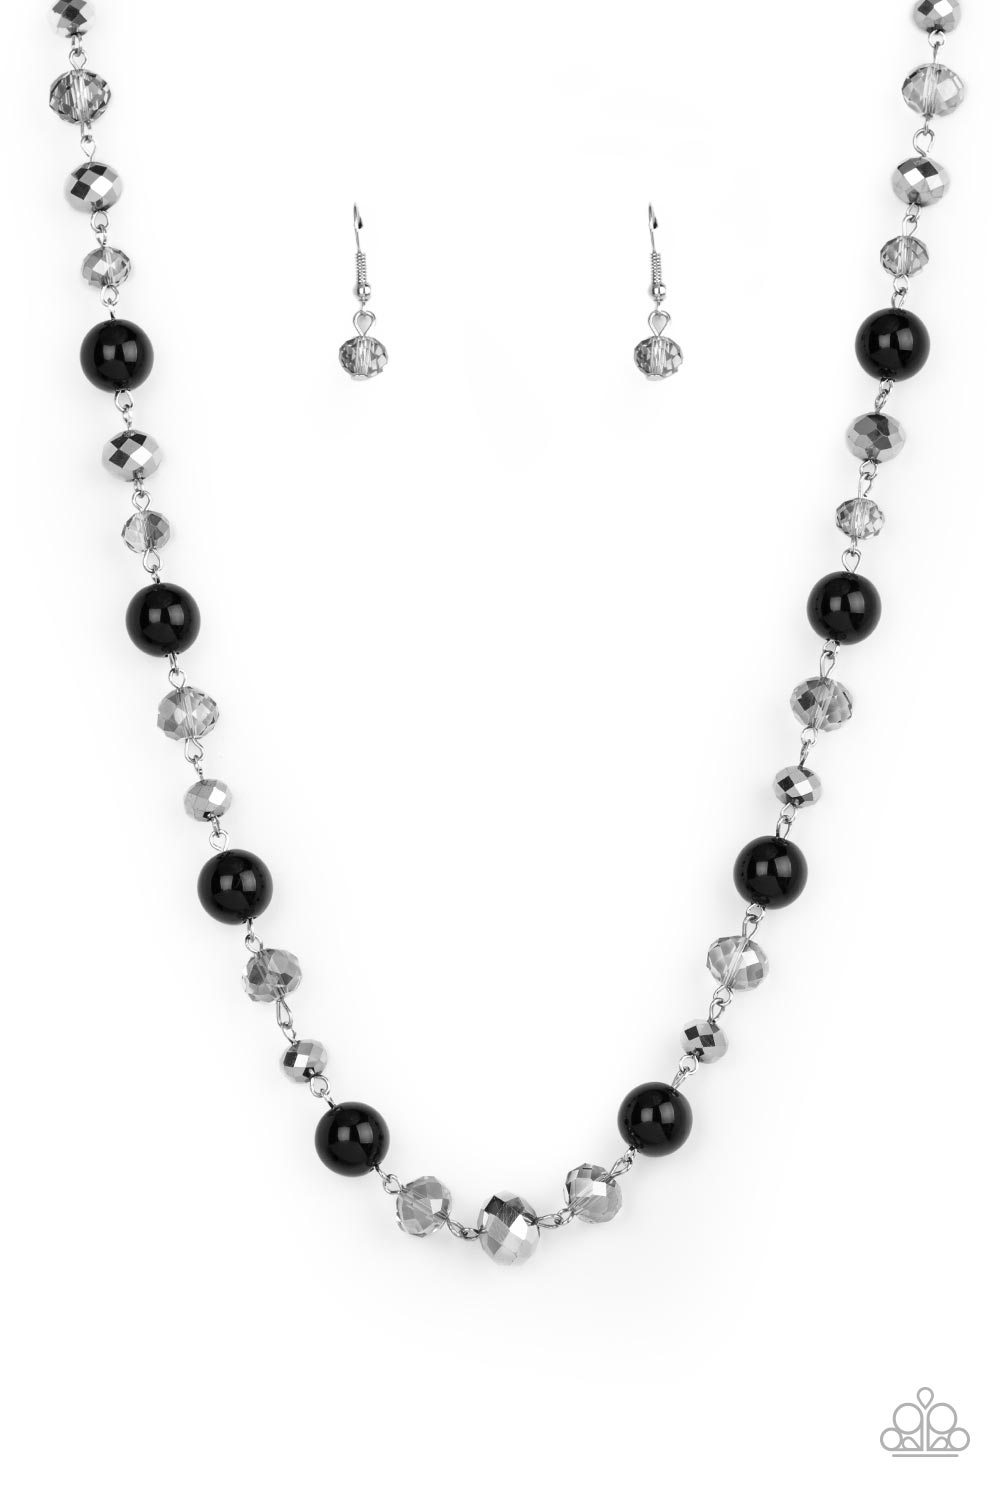 five-dollar-jewelry-decked-out-dazzle-black-necklace-paparazzi-accessories